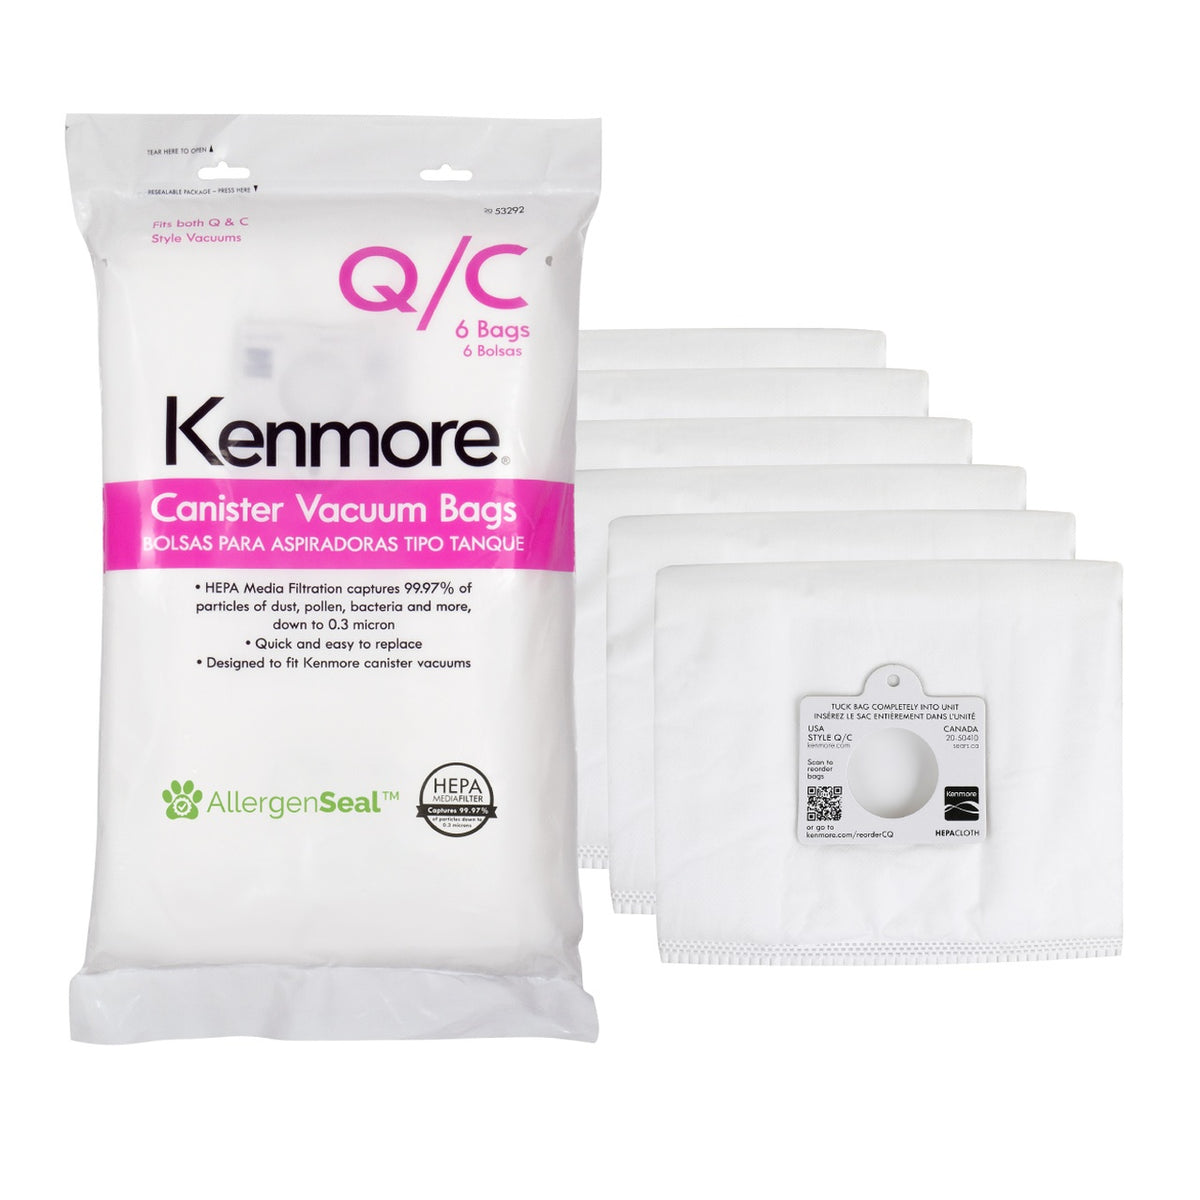 Kenmore 53292 Canister Vacuum Cleaner Bags